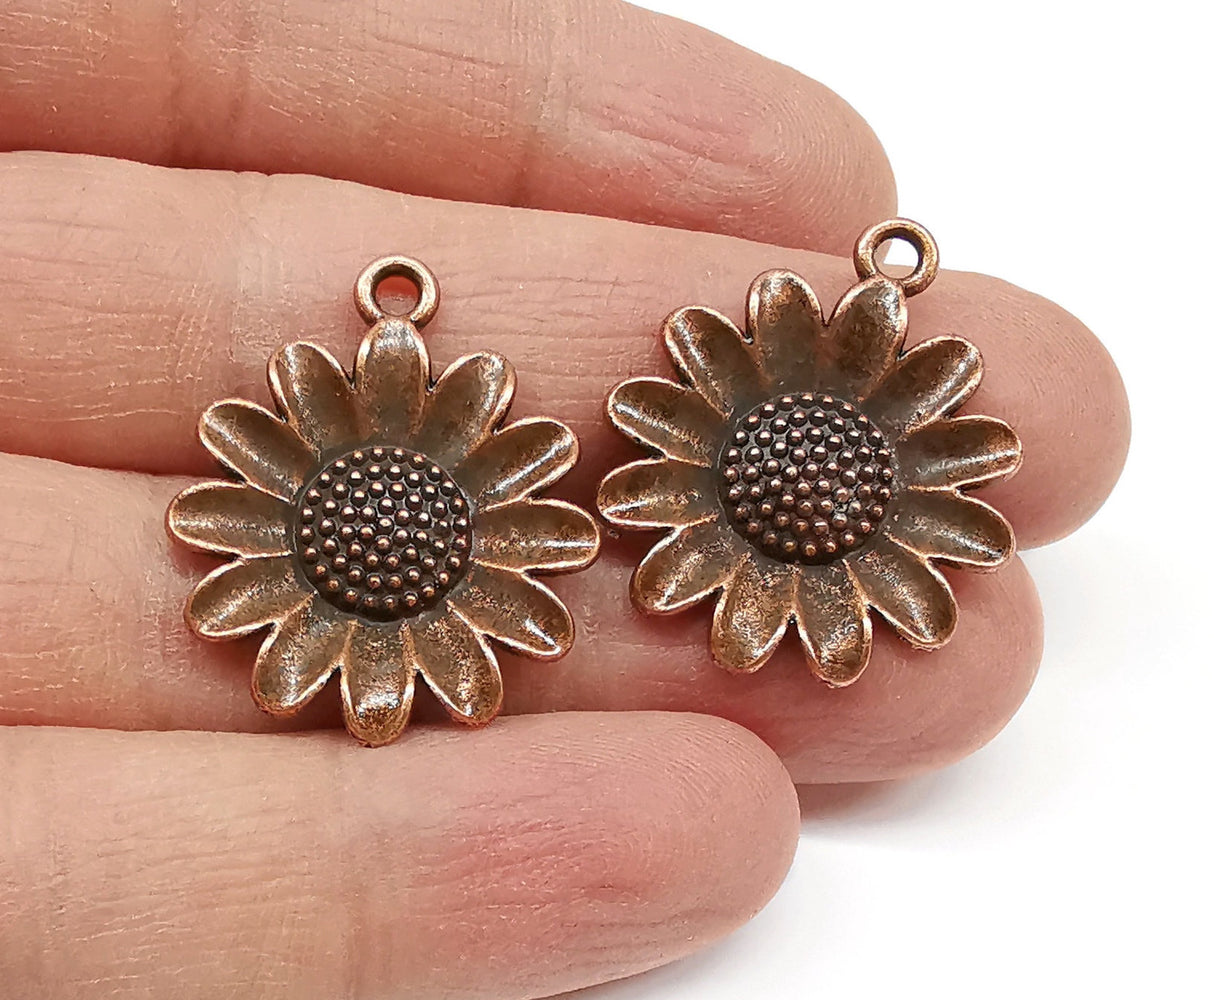 4 Daisy Charms Flower Charms Antique Copper Plated Charms (30x25mm)  G21389